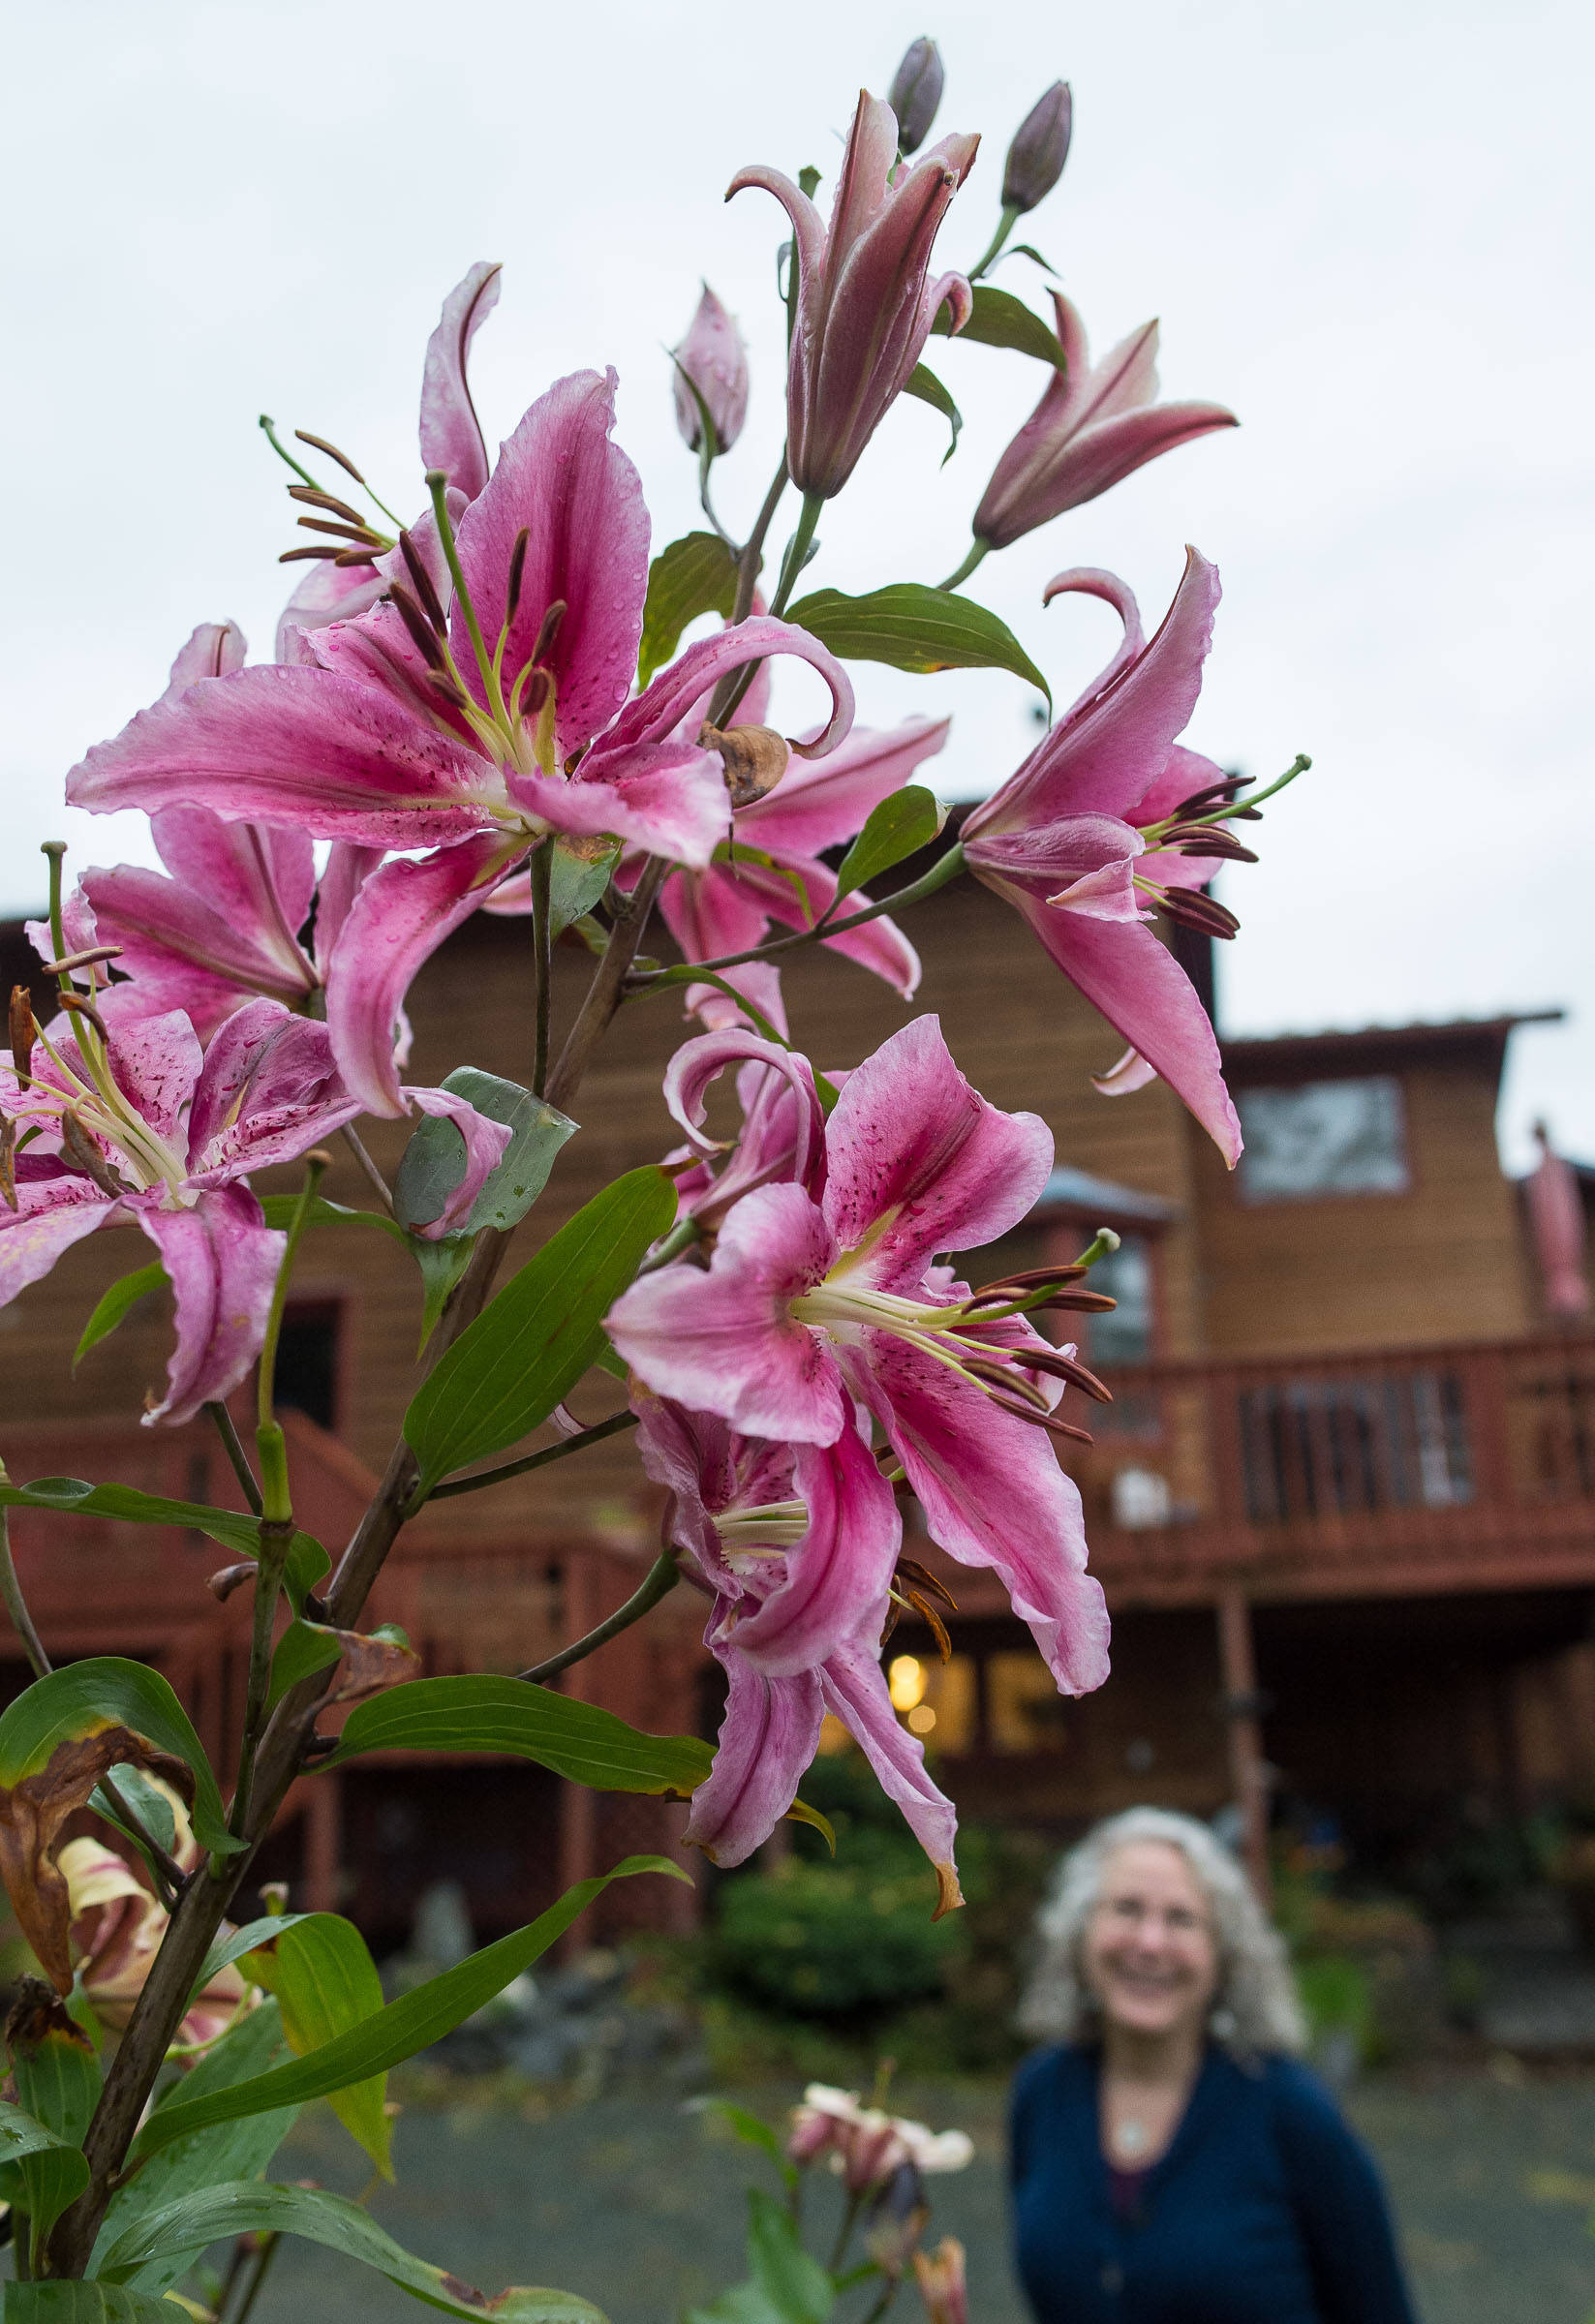 Nell McConahey at her Juneau home with Oriental hybrid lilies still in bloom on Thursday, Oct. 5, 2017. McConahey won for a pink Casablanca lily that was in bloom in August. (Michael Penn | Juneau Empire)